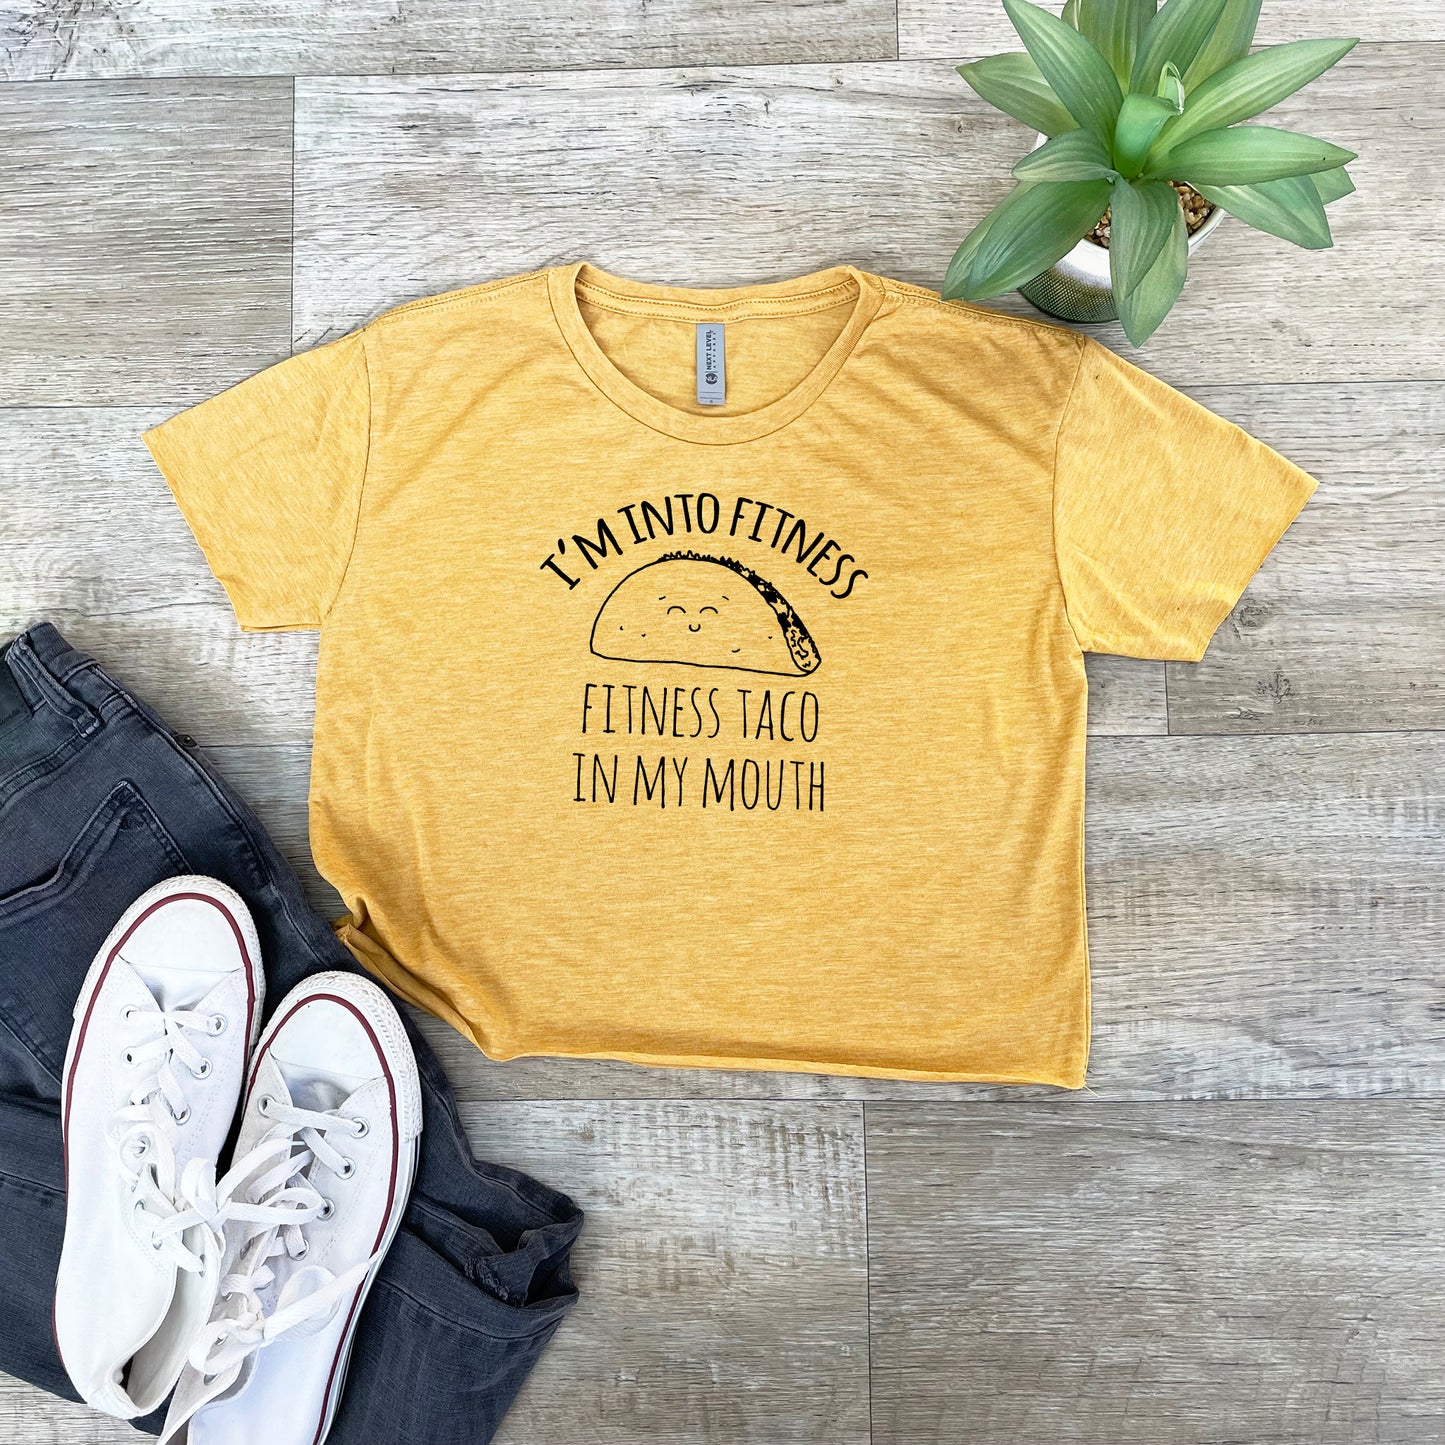 I'm Into Fitness, Fitness Taco In My Mouth - Women's Crop Tee - Heather Gray or Gold